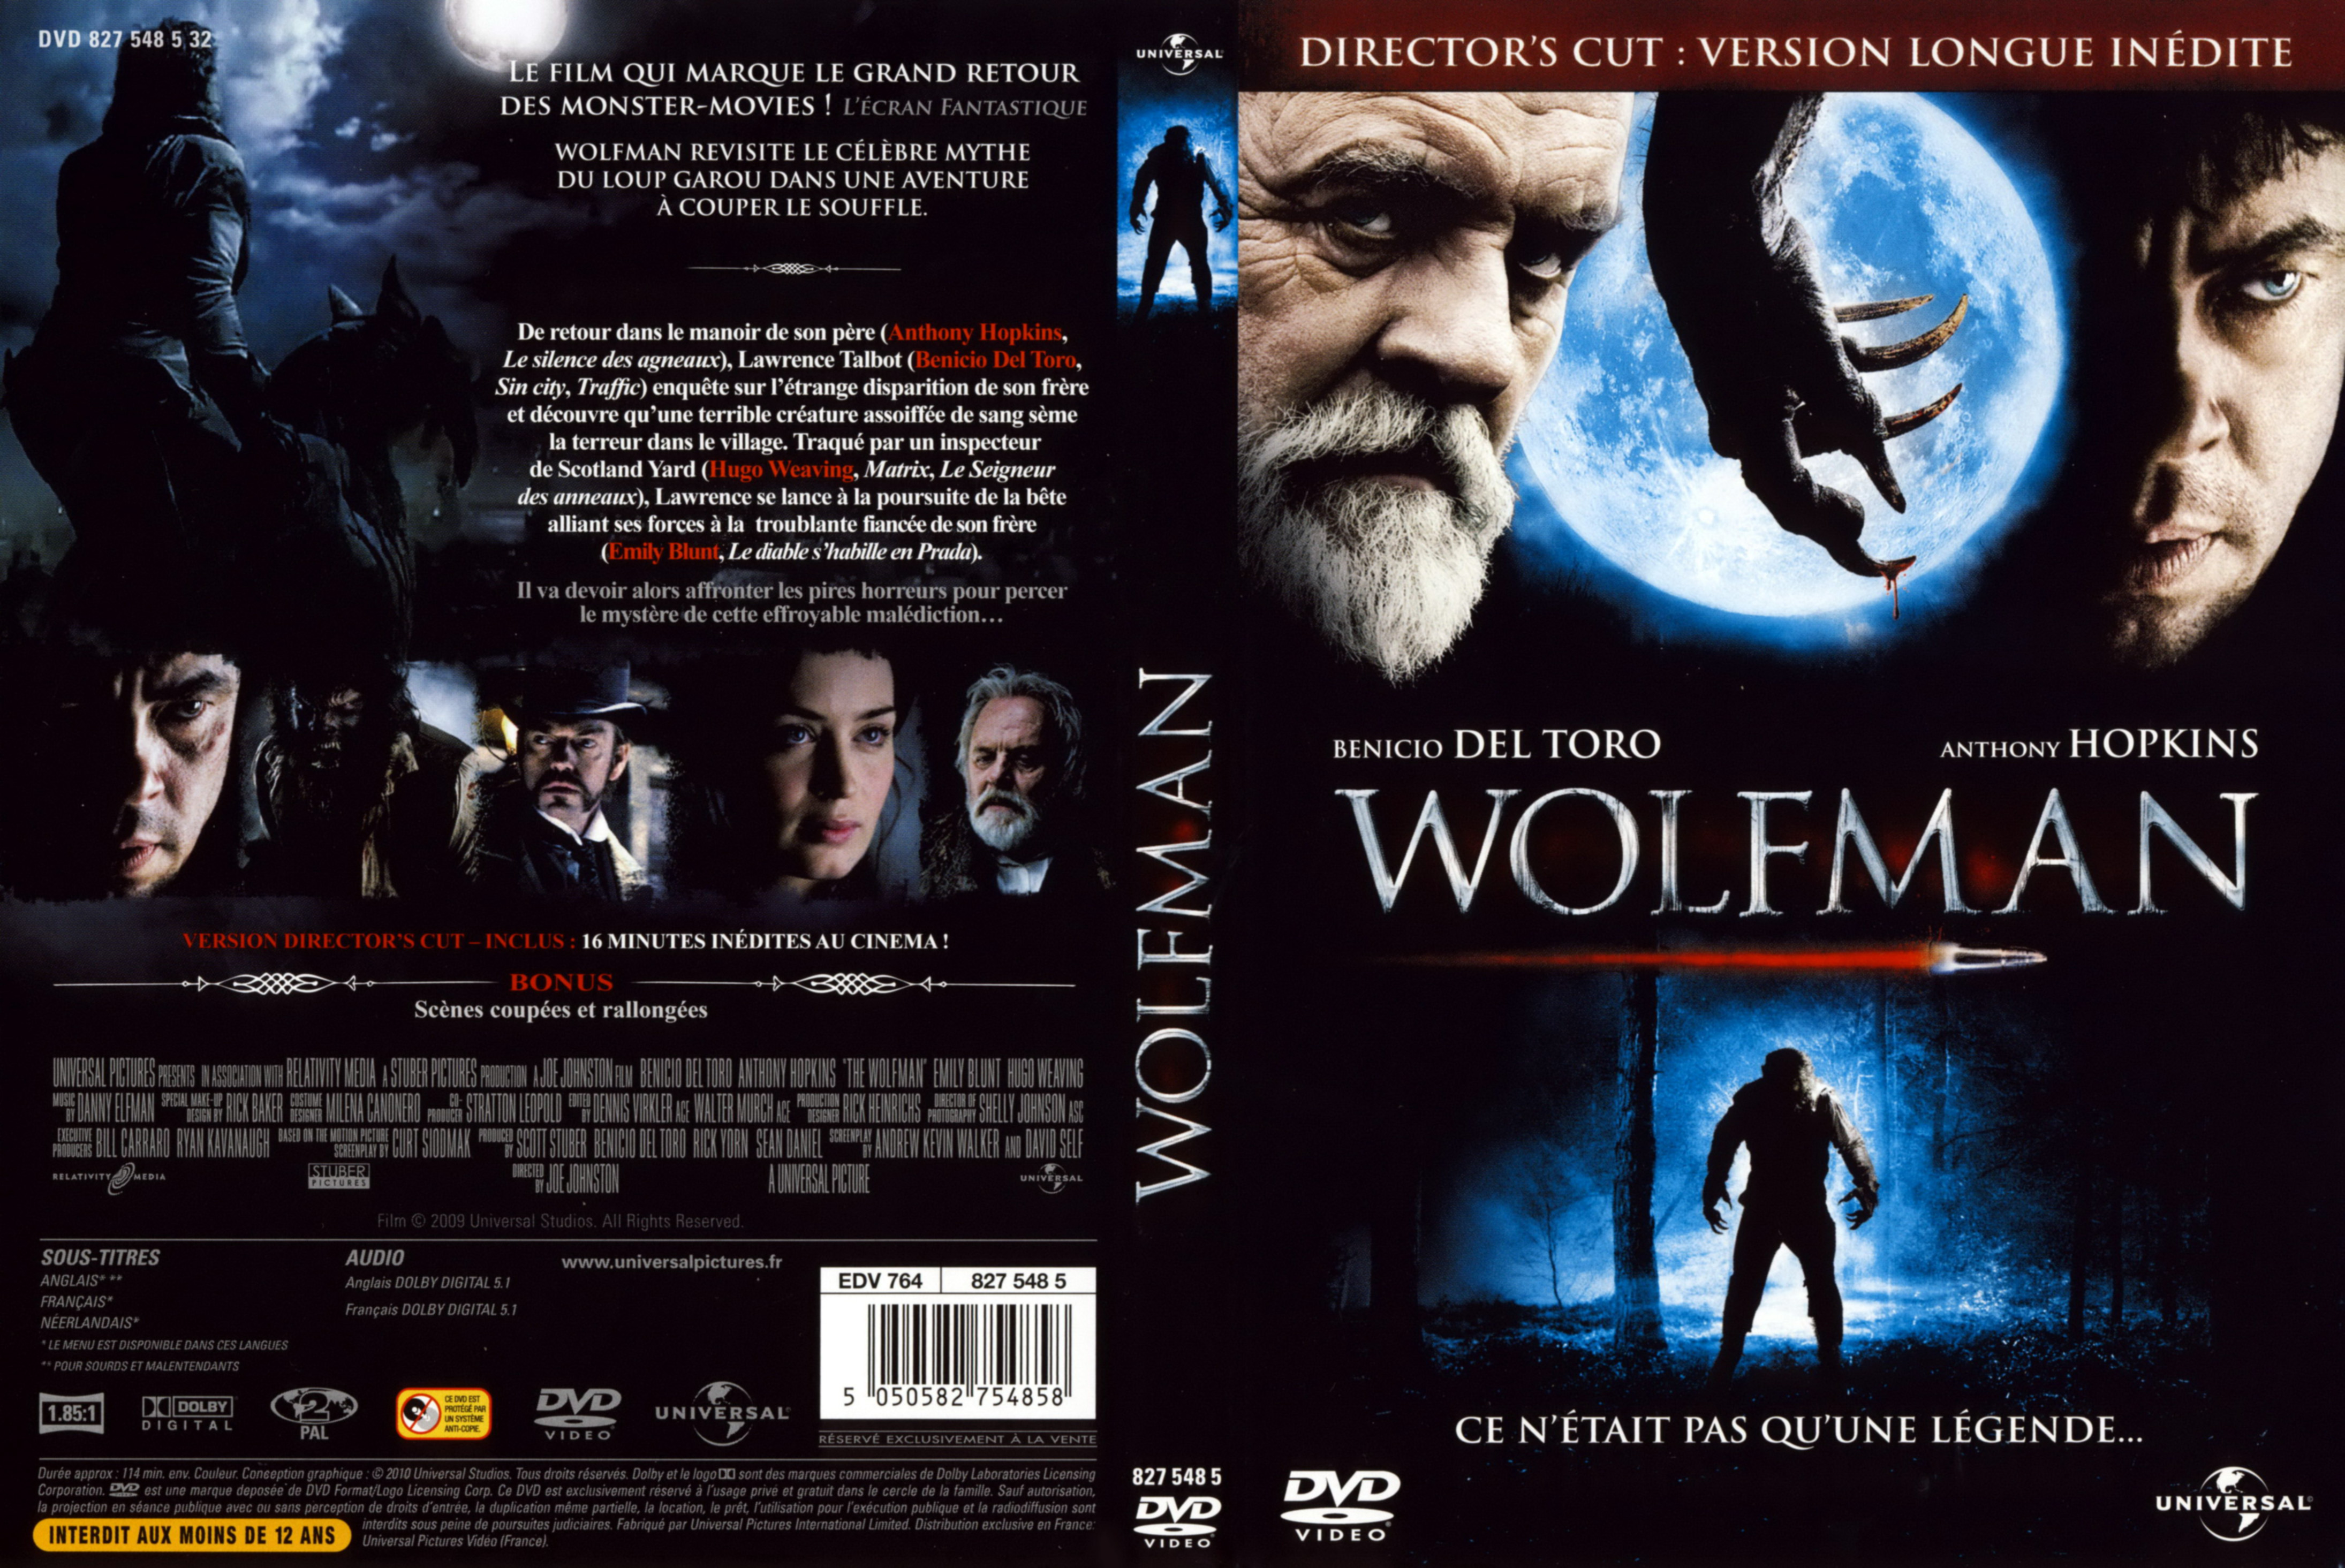 Jaquette DVD Wolfman